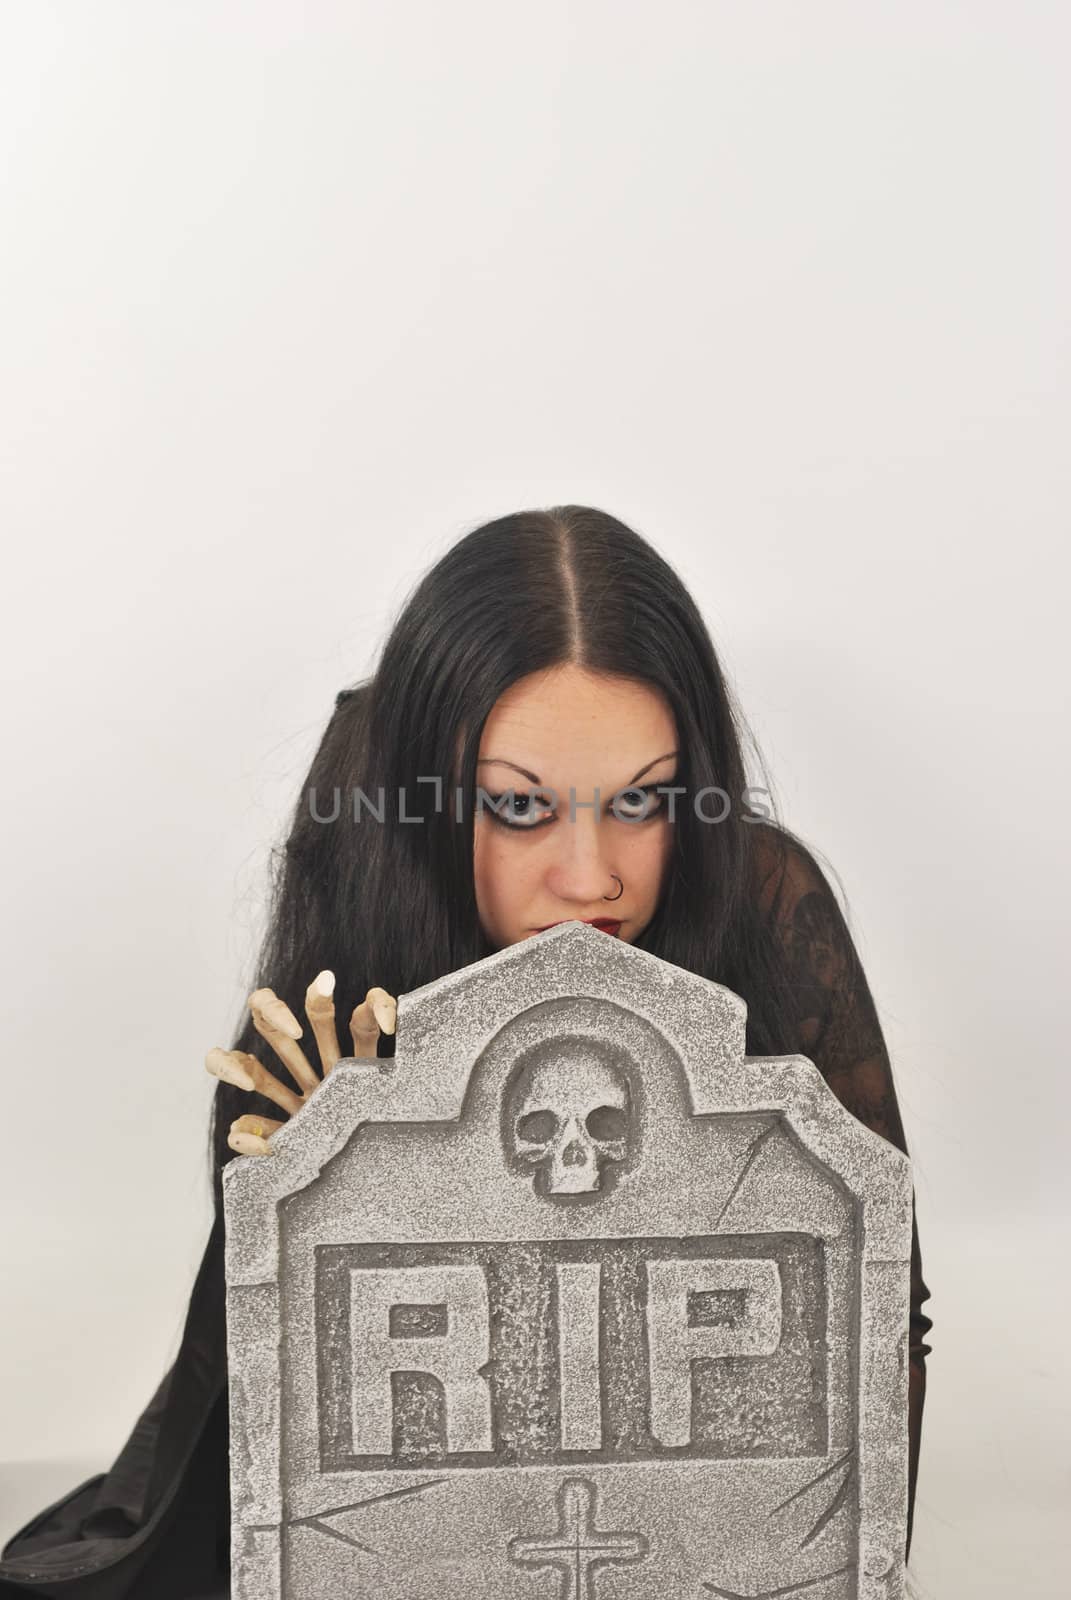 Goth with gravestone by pauws99